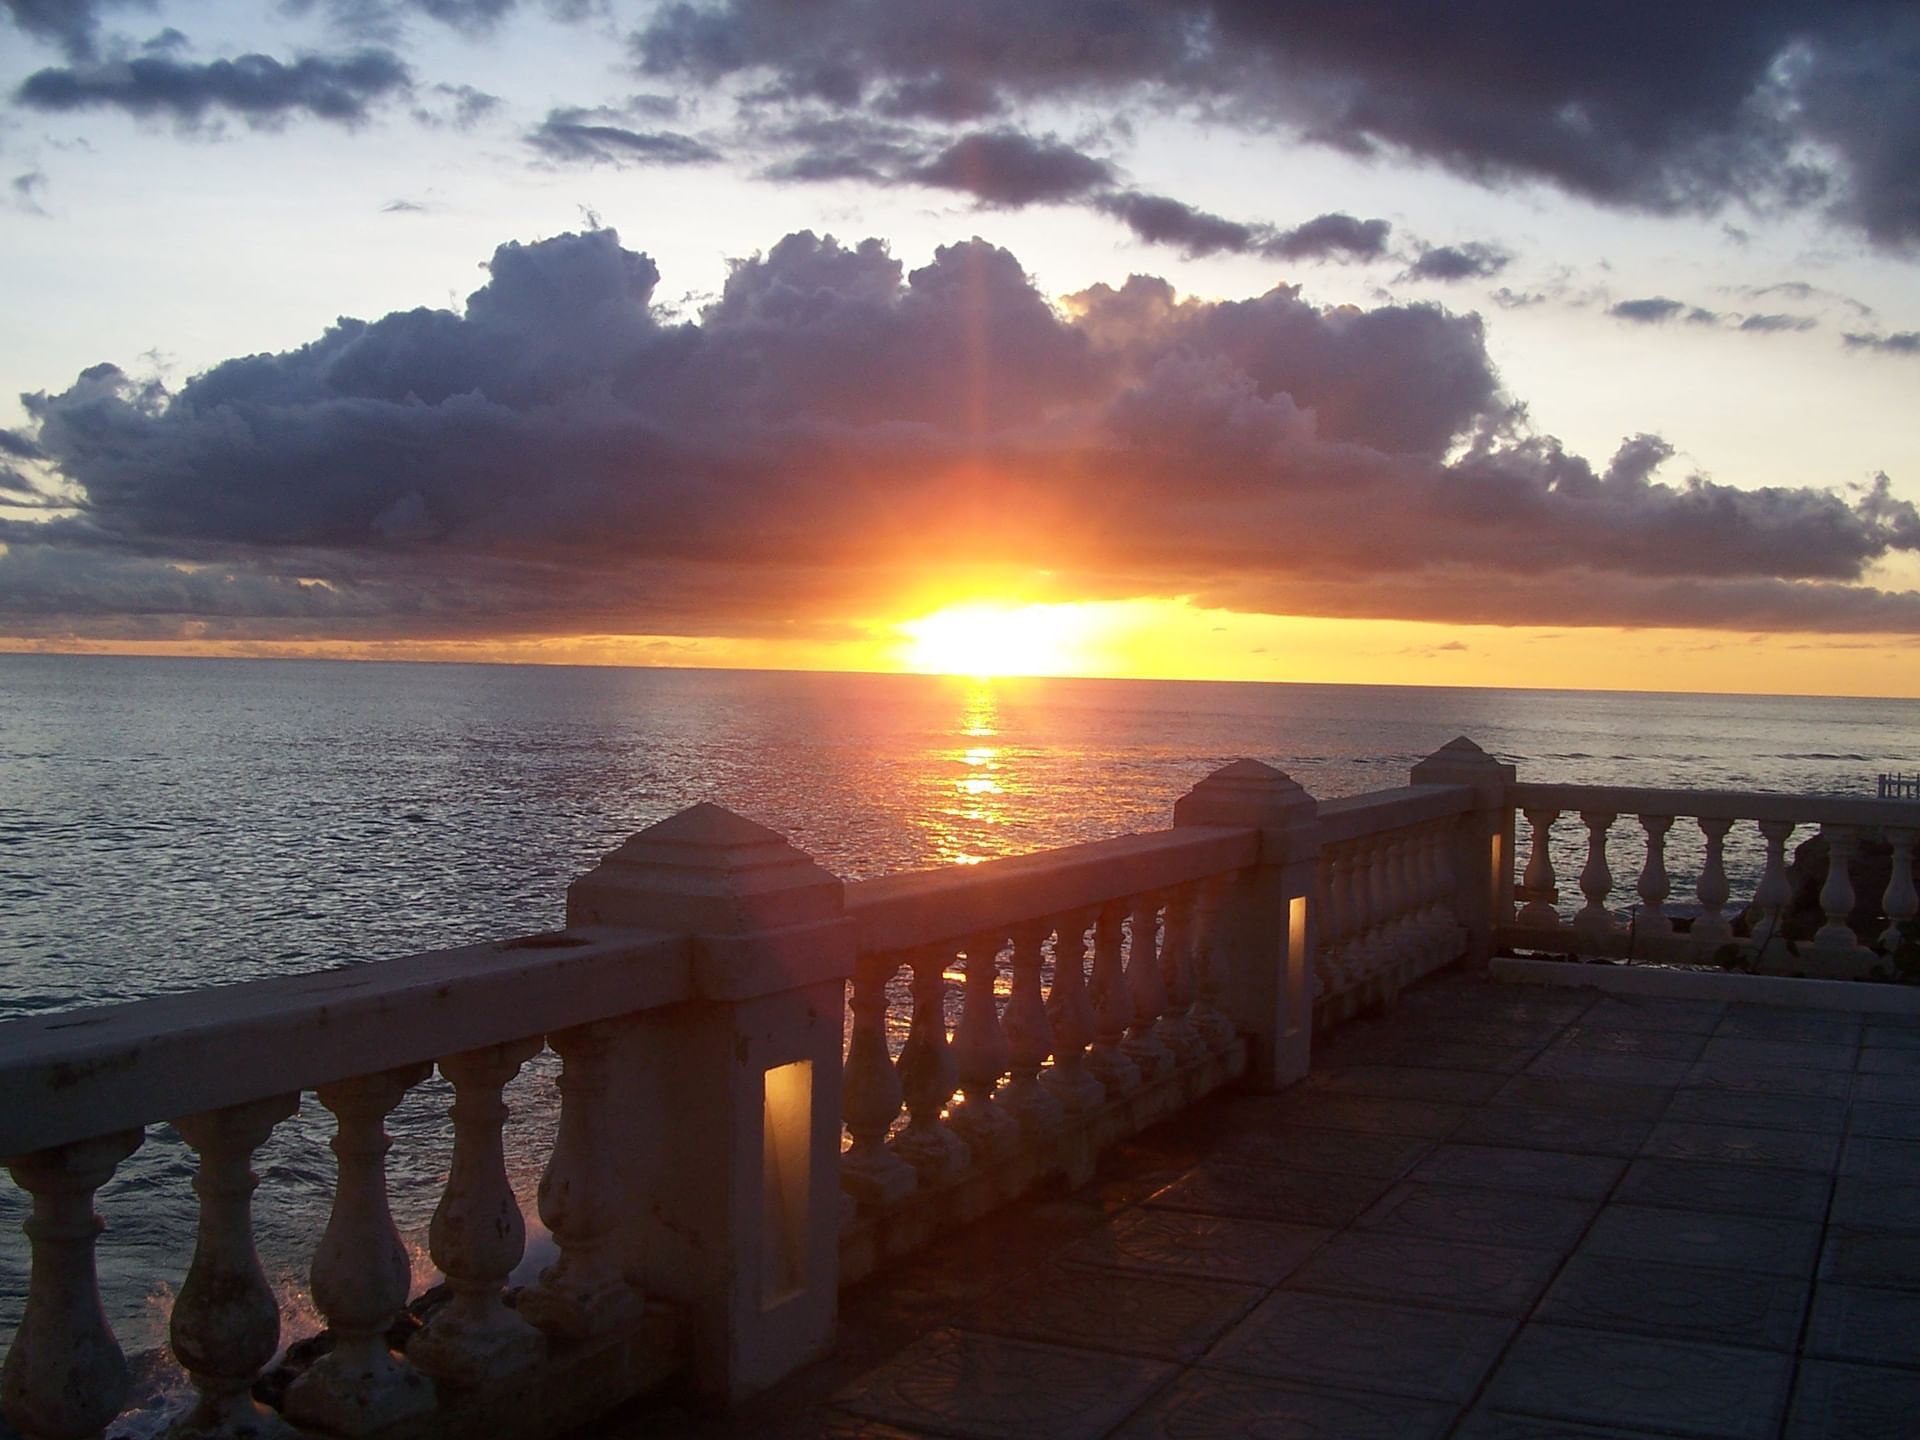 Serene sunset over the ocean, captured from terrace at Dover Beach Hotel